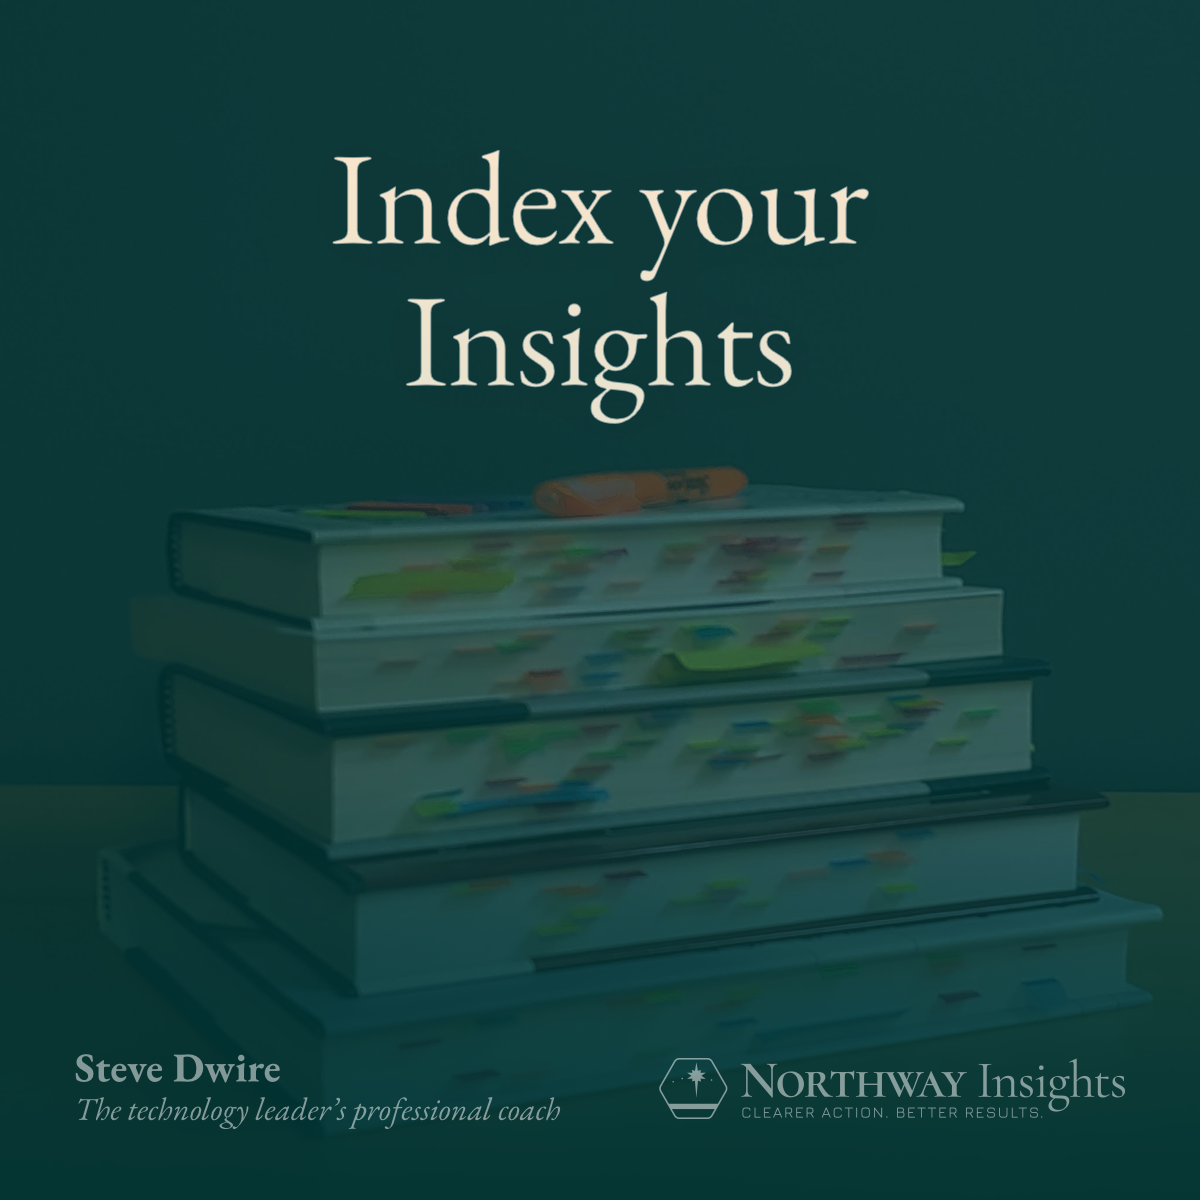 Index your Insights